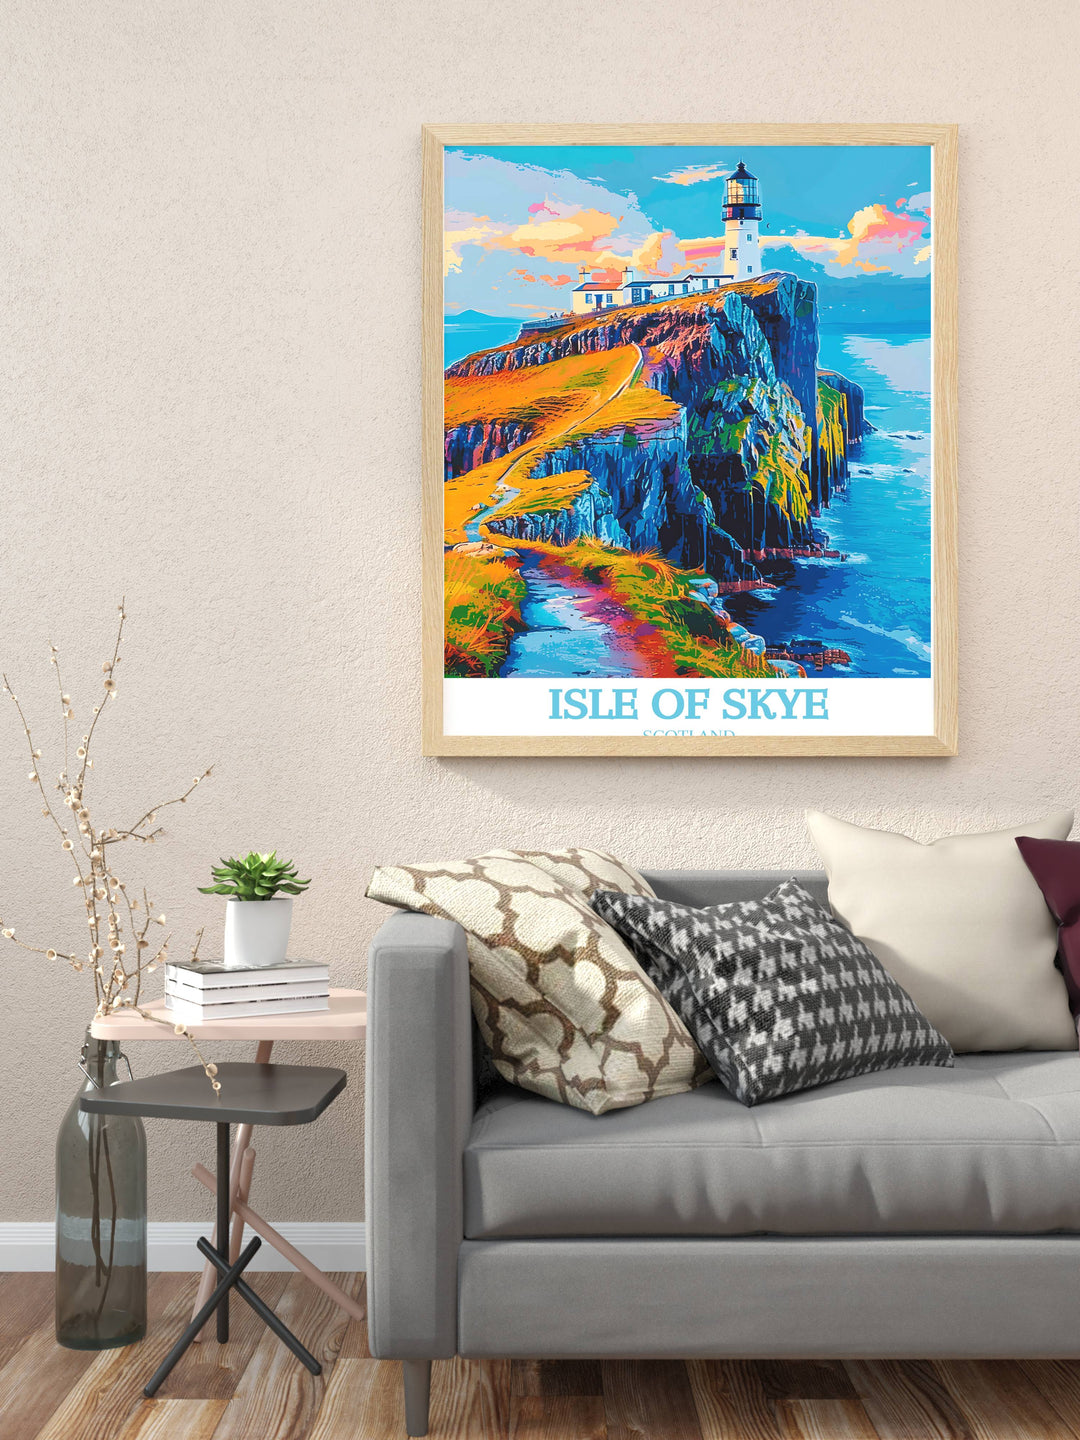 A vibrant artwork of Neist Point Lighthouse under a colorful sunset sky, bringing warmth and energy to your living space.